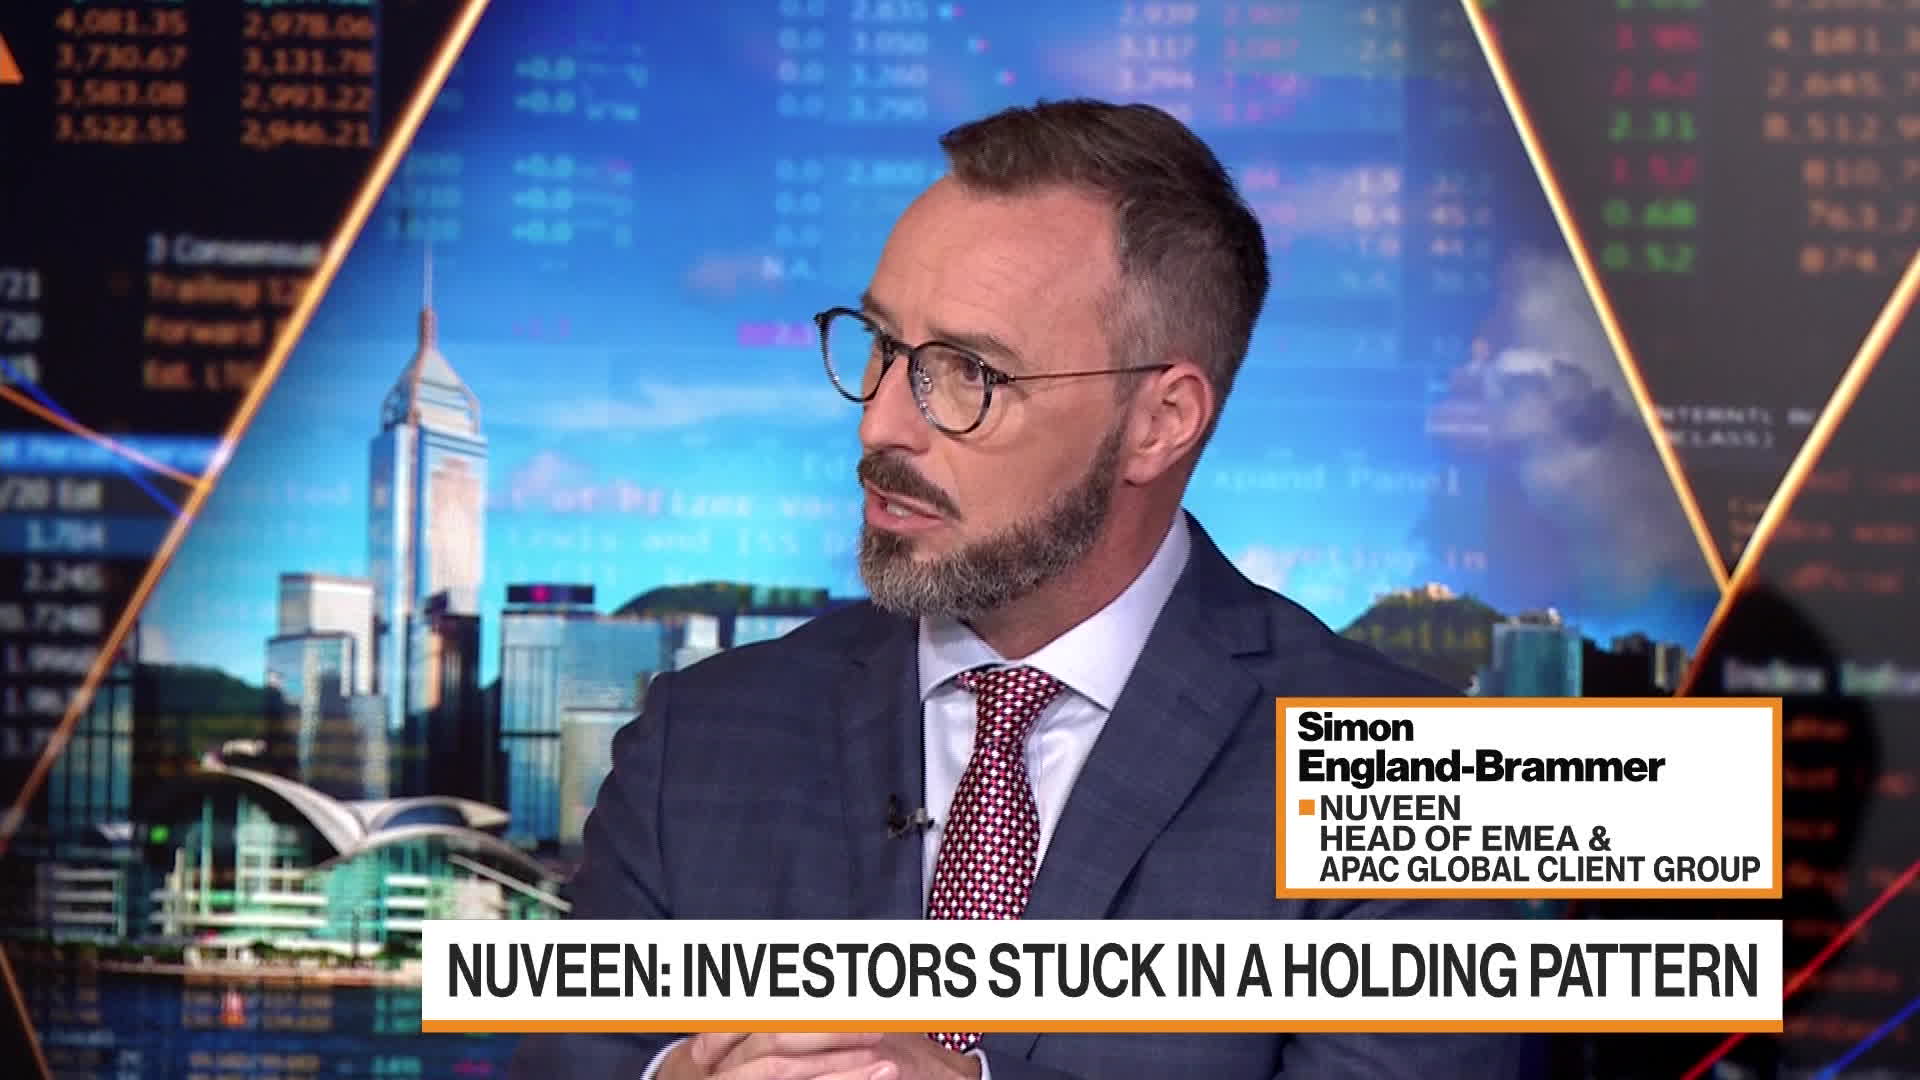 Watch Nuveen on Institutional Investor Sentiment - Bloomberg